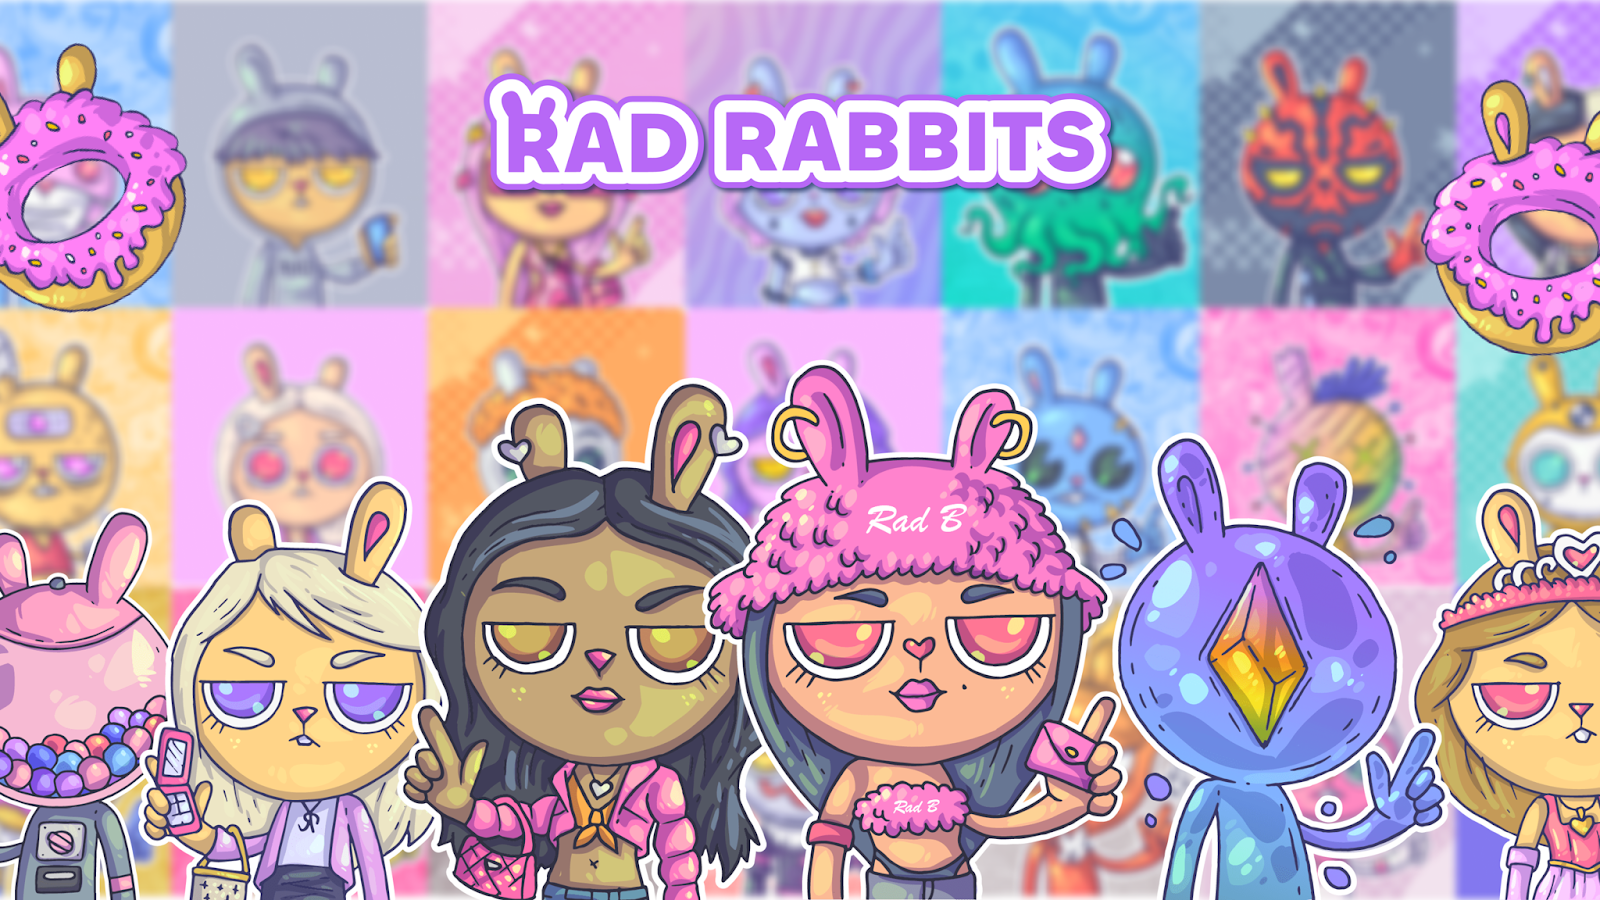 Rad Rabbits, Tuesday 23 August 2022, Press release image